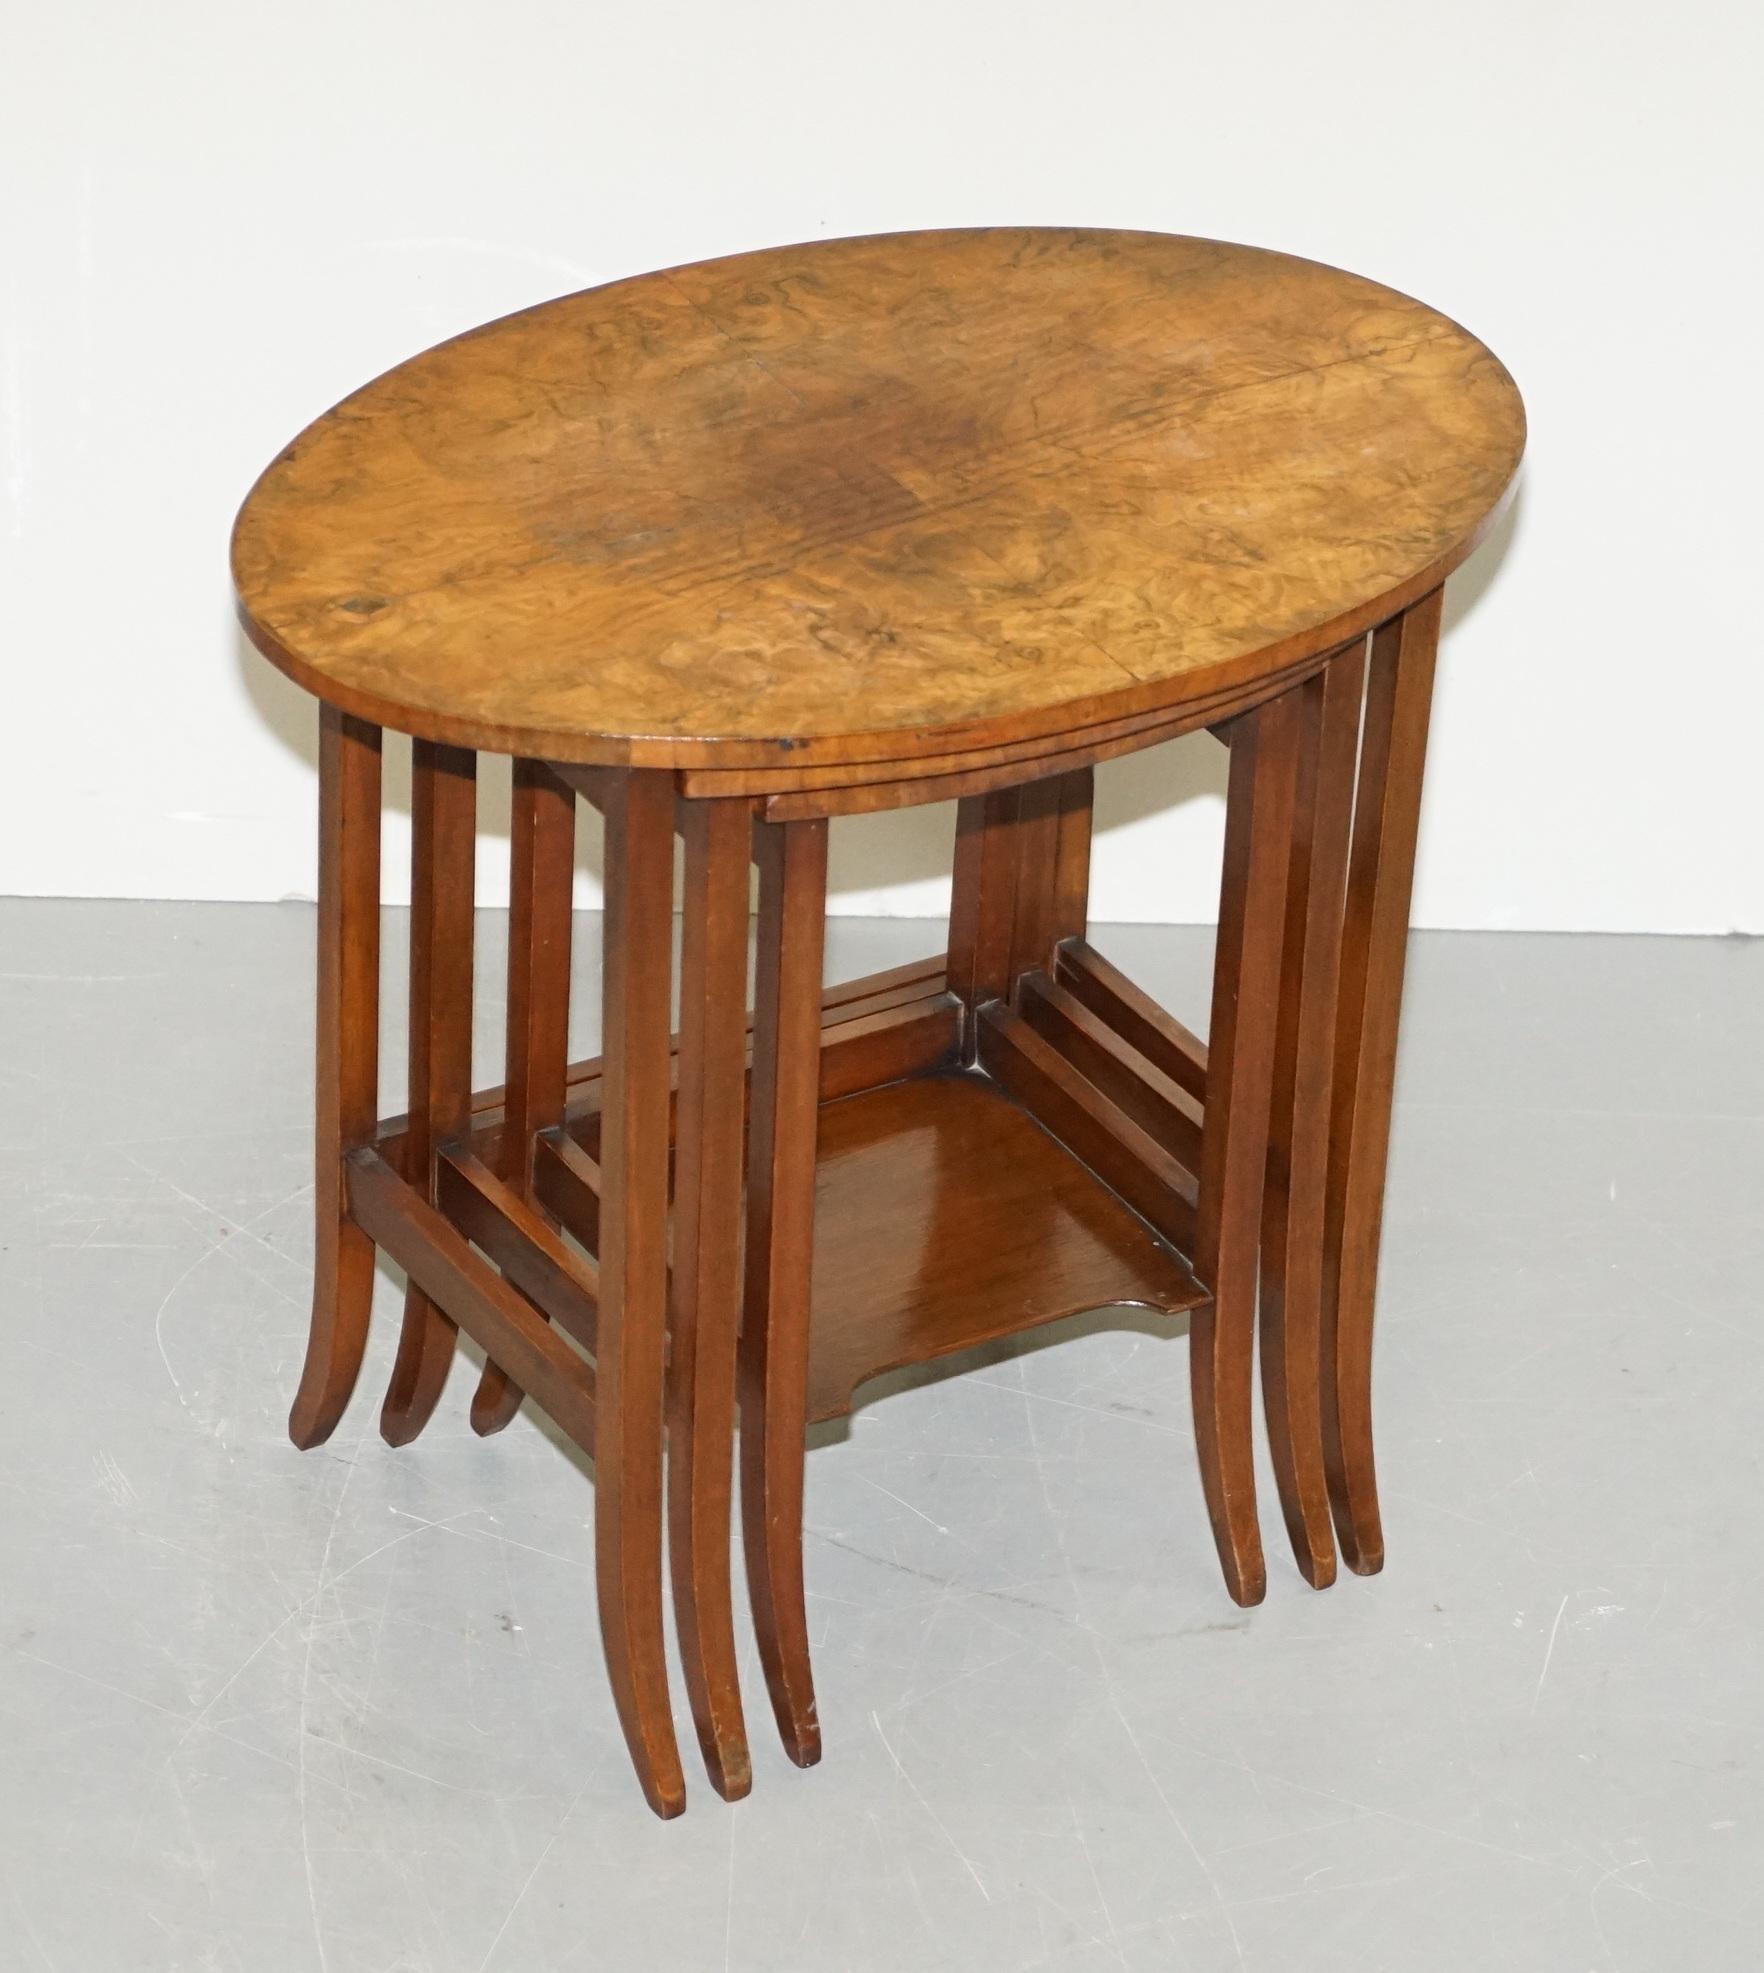 We are delighted to offer for sale this stunning Burr and quarter cut walnut nest of tables circa 1900

A very good looking well made and decorative suite, the main table is oval with the two nested tables being rectangle, the timber patina and